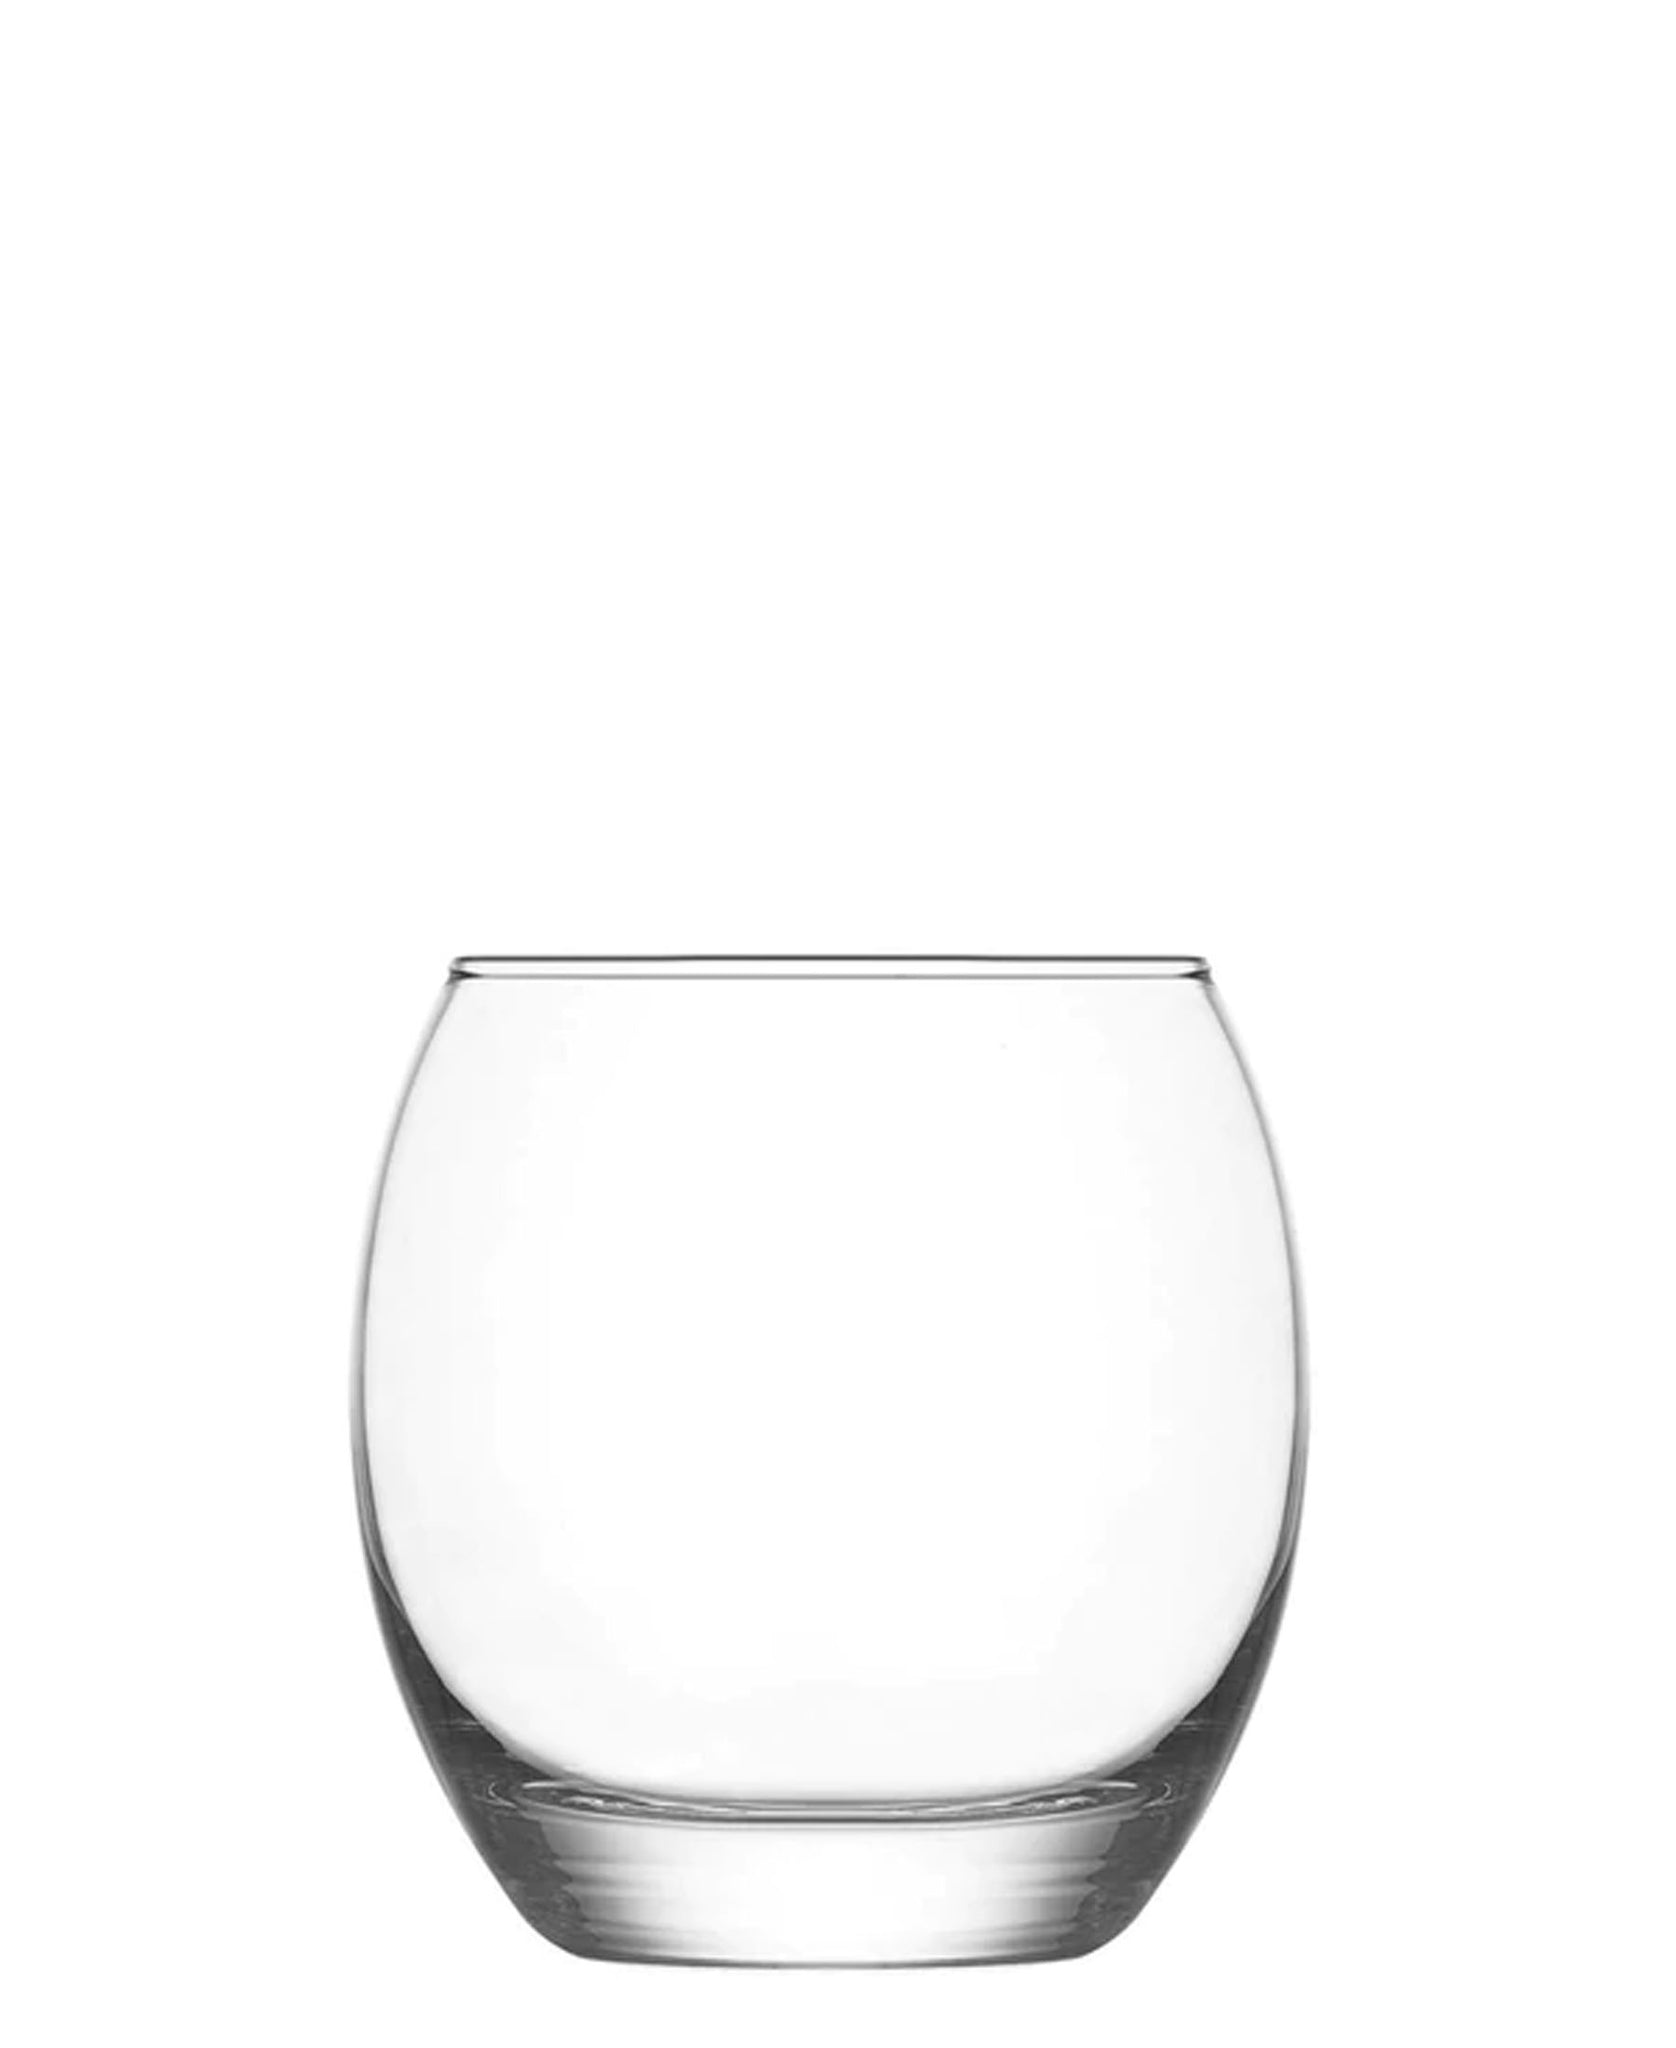 LAV Empire 6 Piece Whiskey Glass - Clear